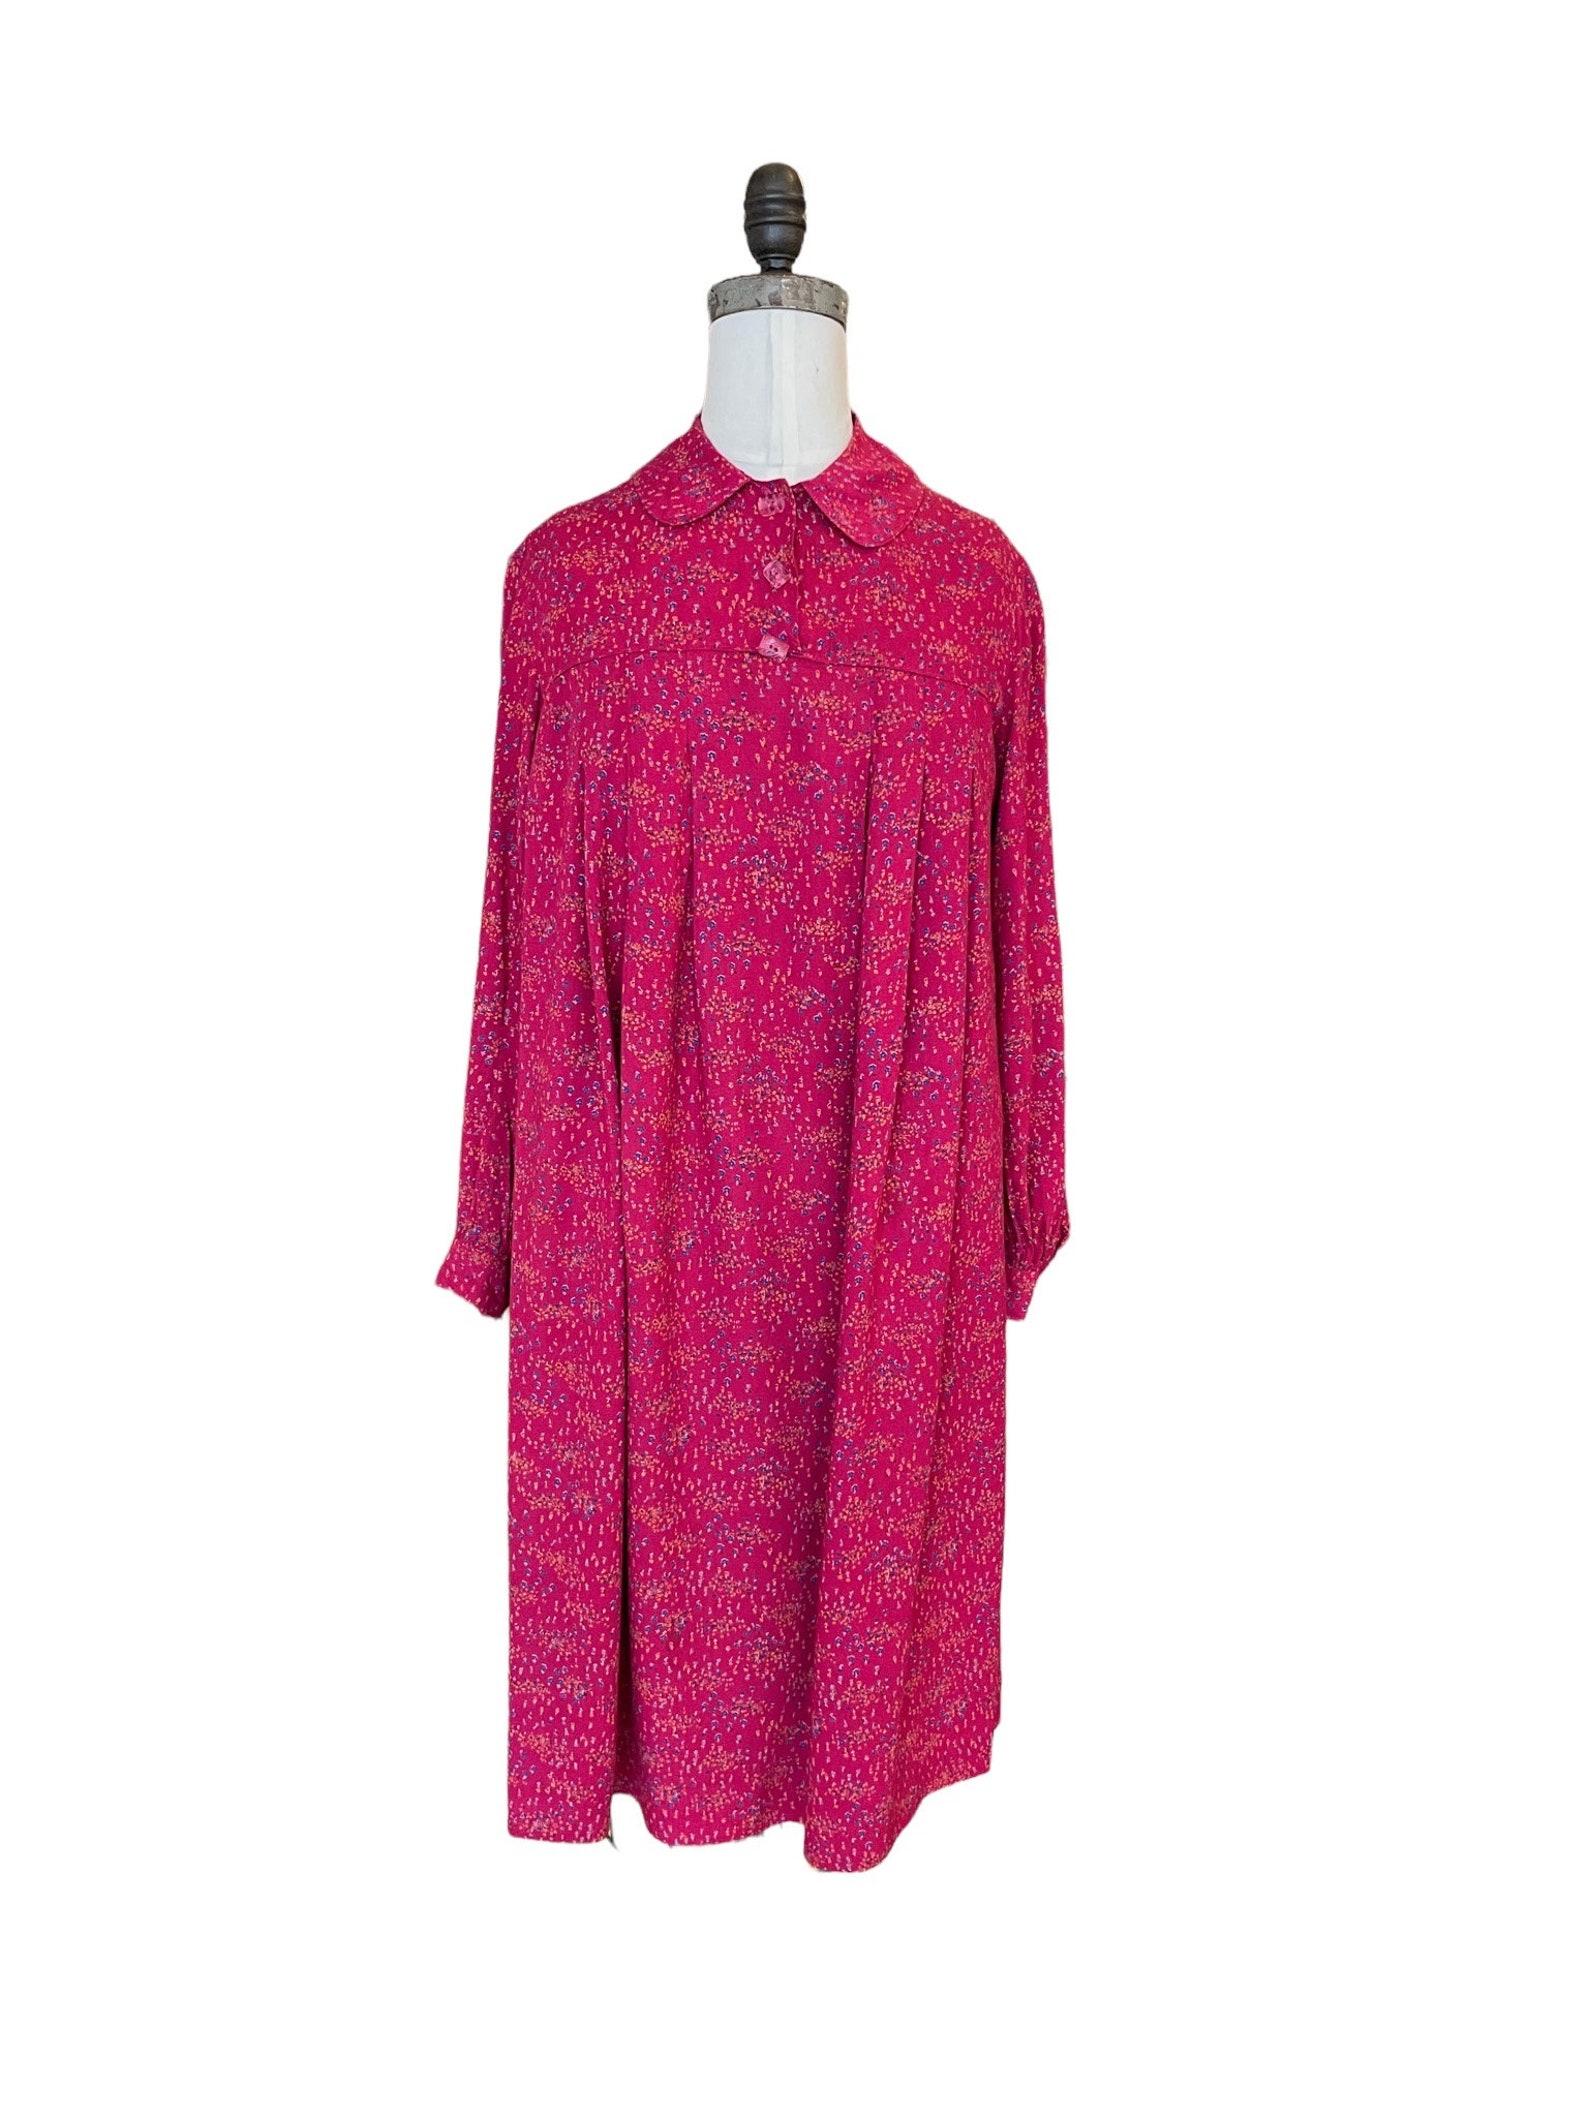 Women's Raspberry Pink Floral Trapeze Dress, Circa 1970s For Sale